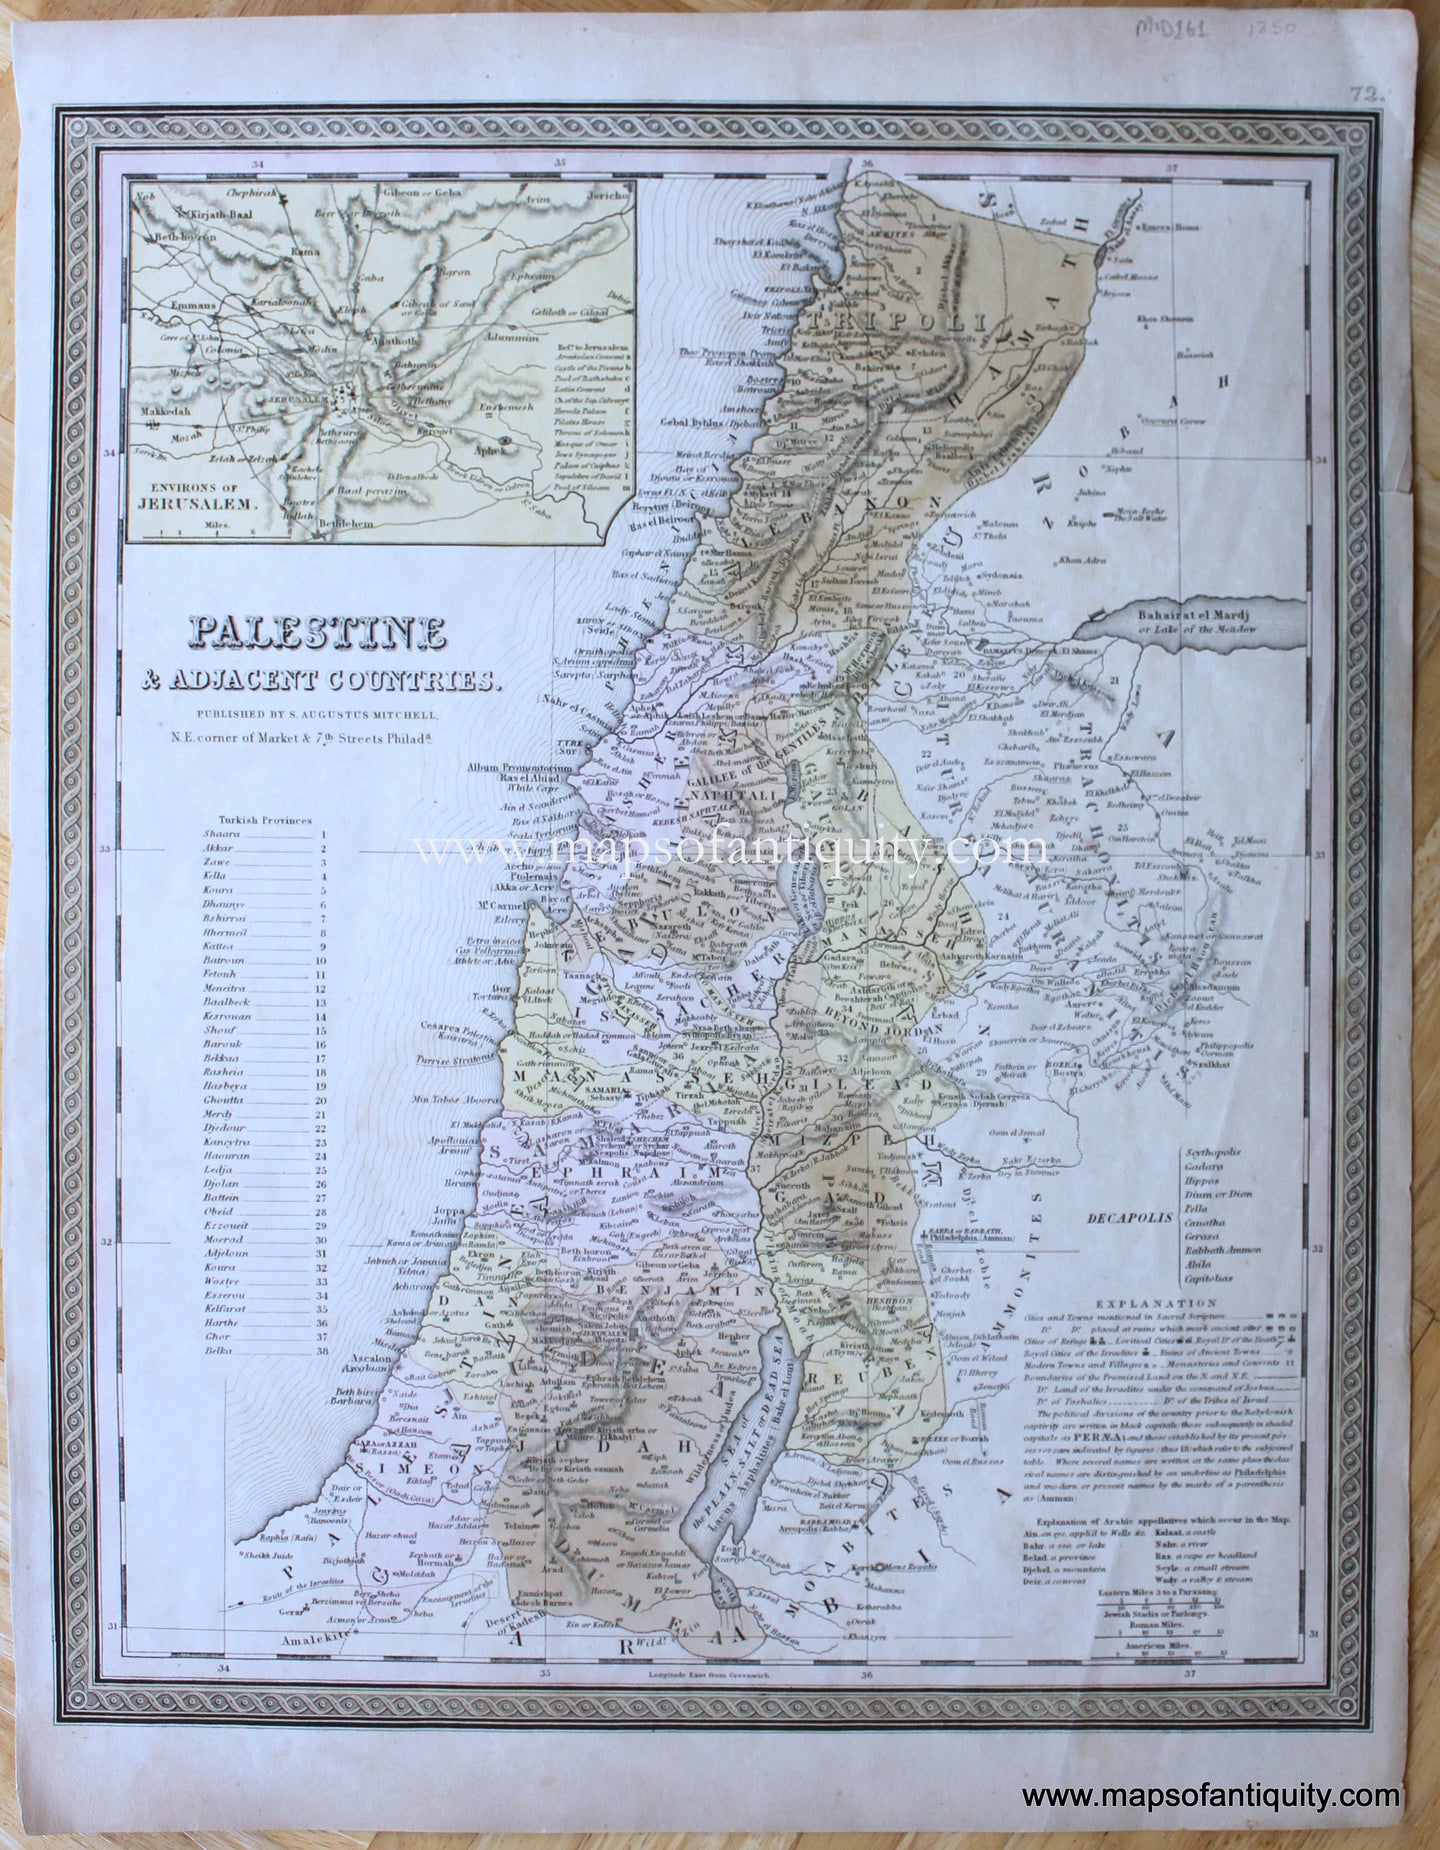 Antique-Hand-Colored-Map-Palestine-&-Adjacent-Countries-Middle-East-&-Holy-Land--1846-Mitchell-Maps-Of-Antiquity